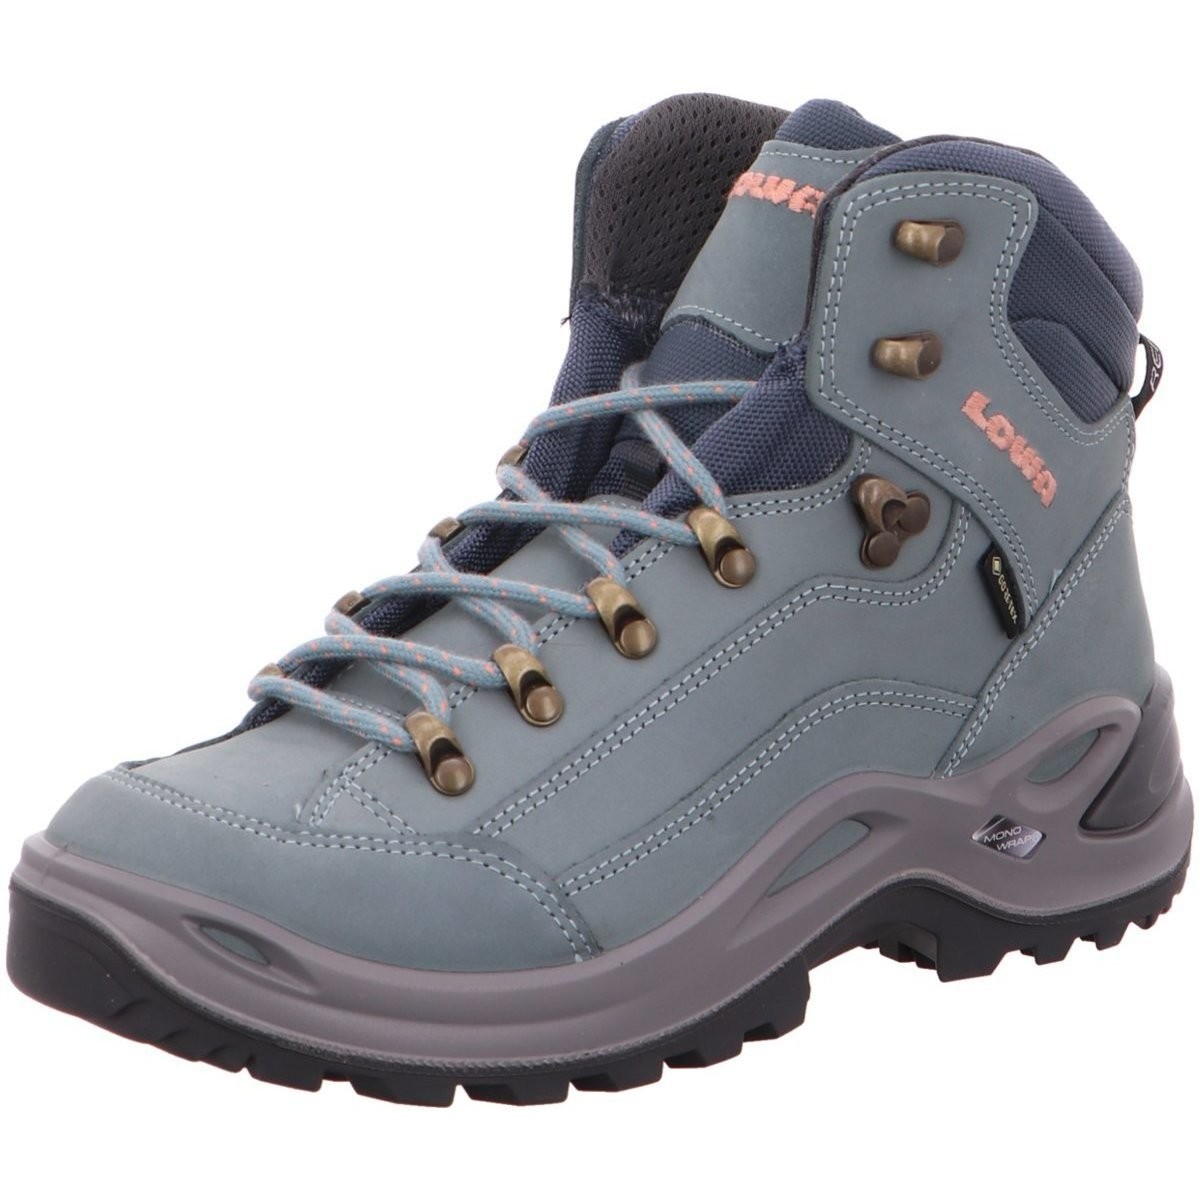 Chaussures Femme The North Face Lowa  Bleu